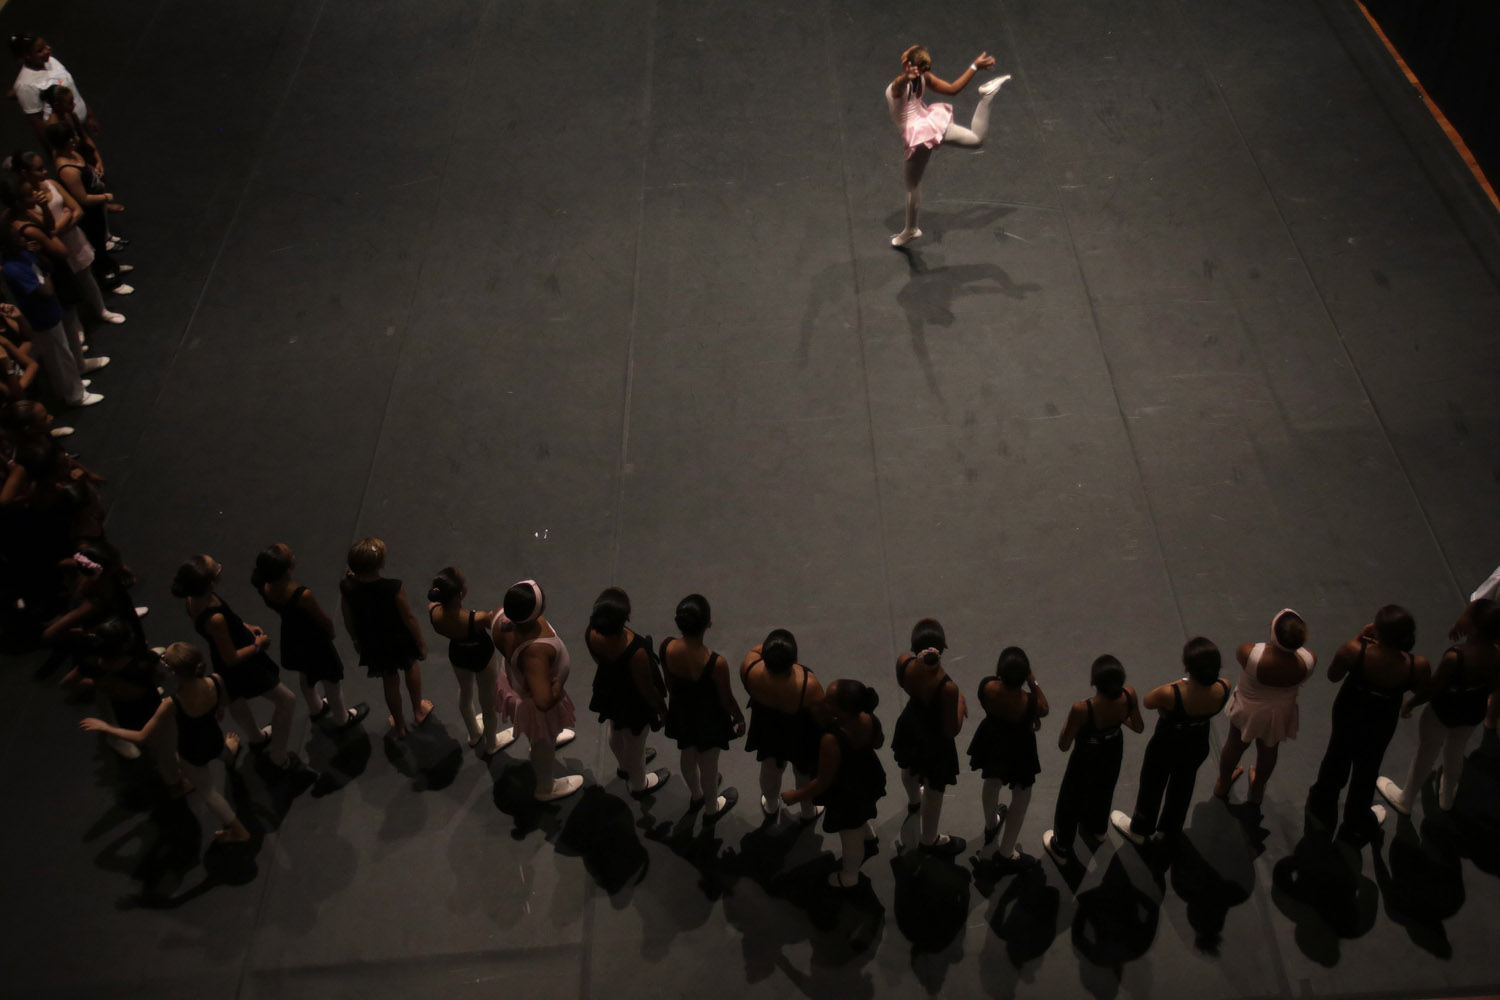 Feb. 23, 2013. Students attend a masterclass with dancers of the Royal Opera House at the Rio de Janeiro Municipal Theatre in Brazil.